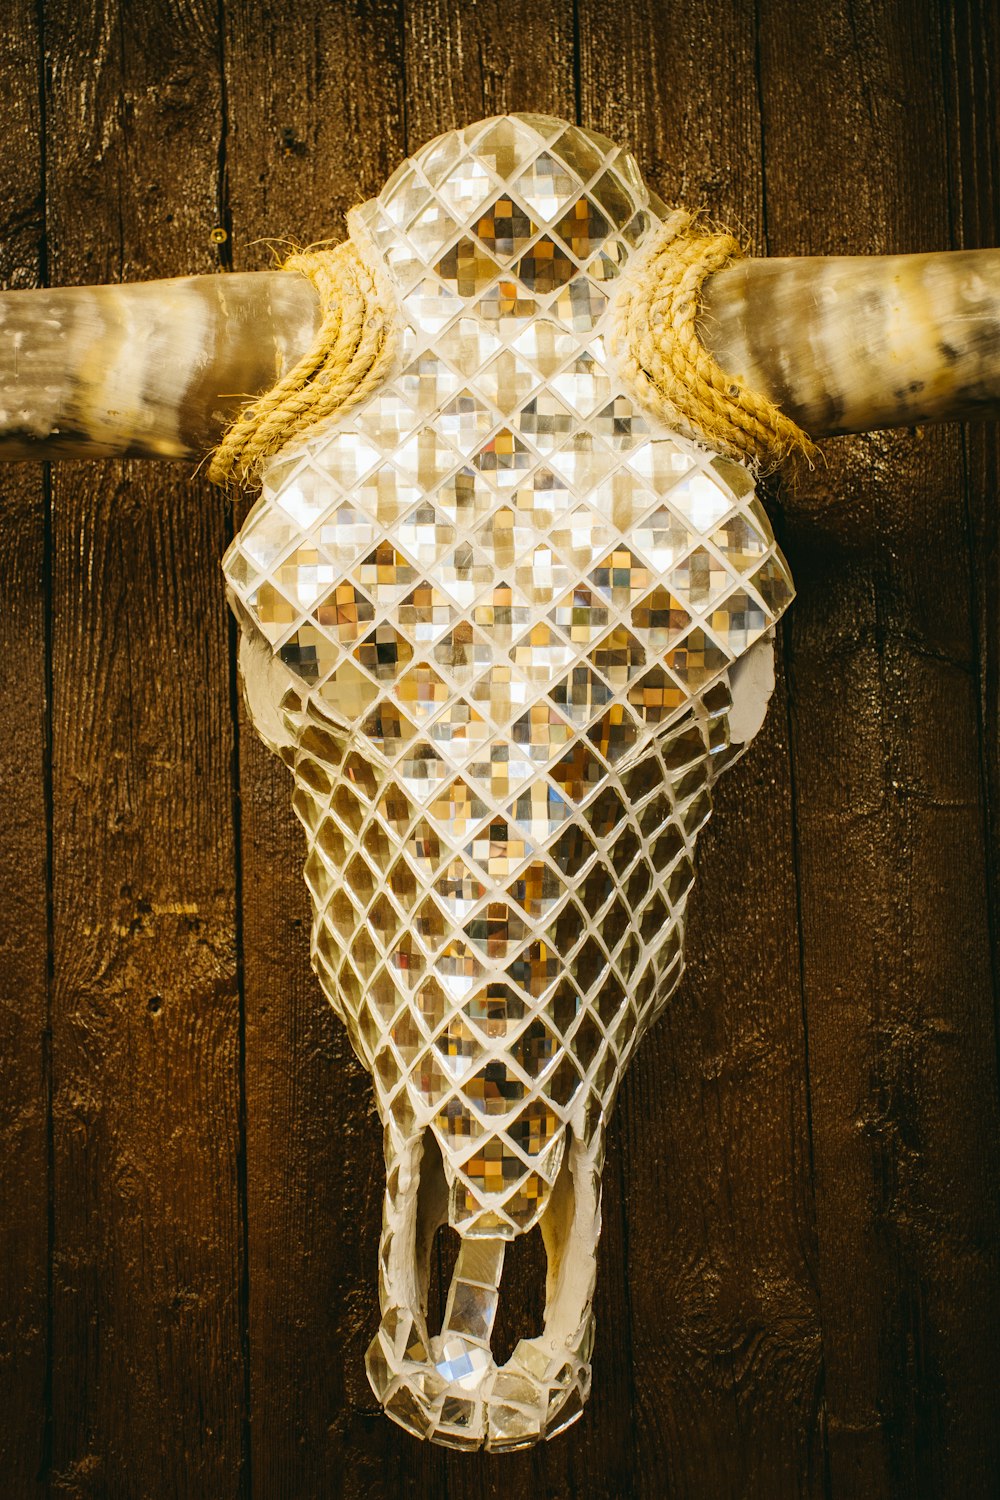 a bull's head made out of a mesh net